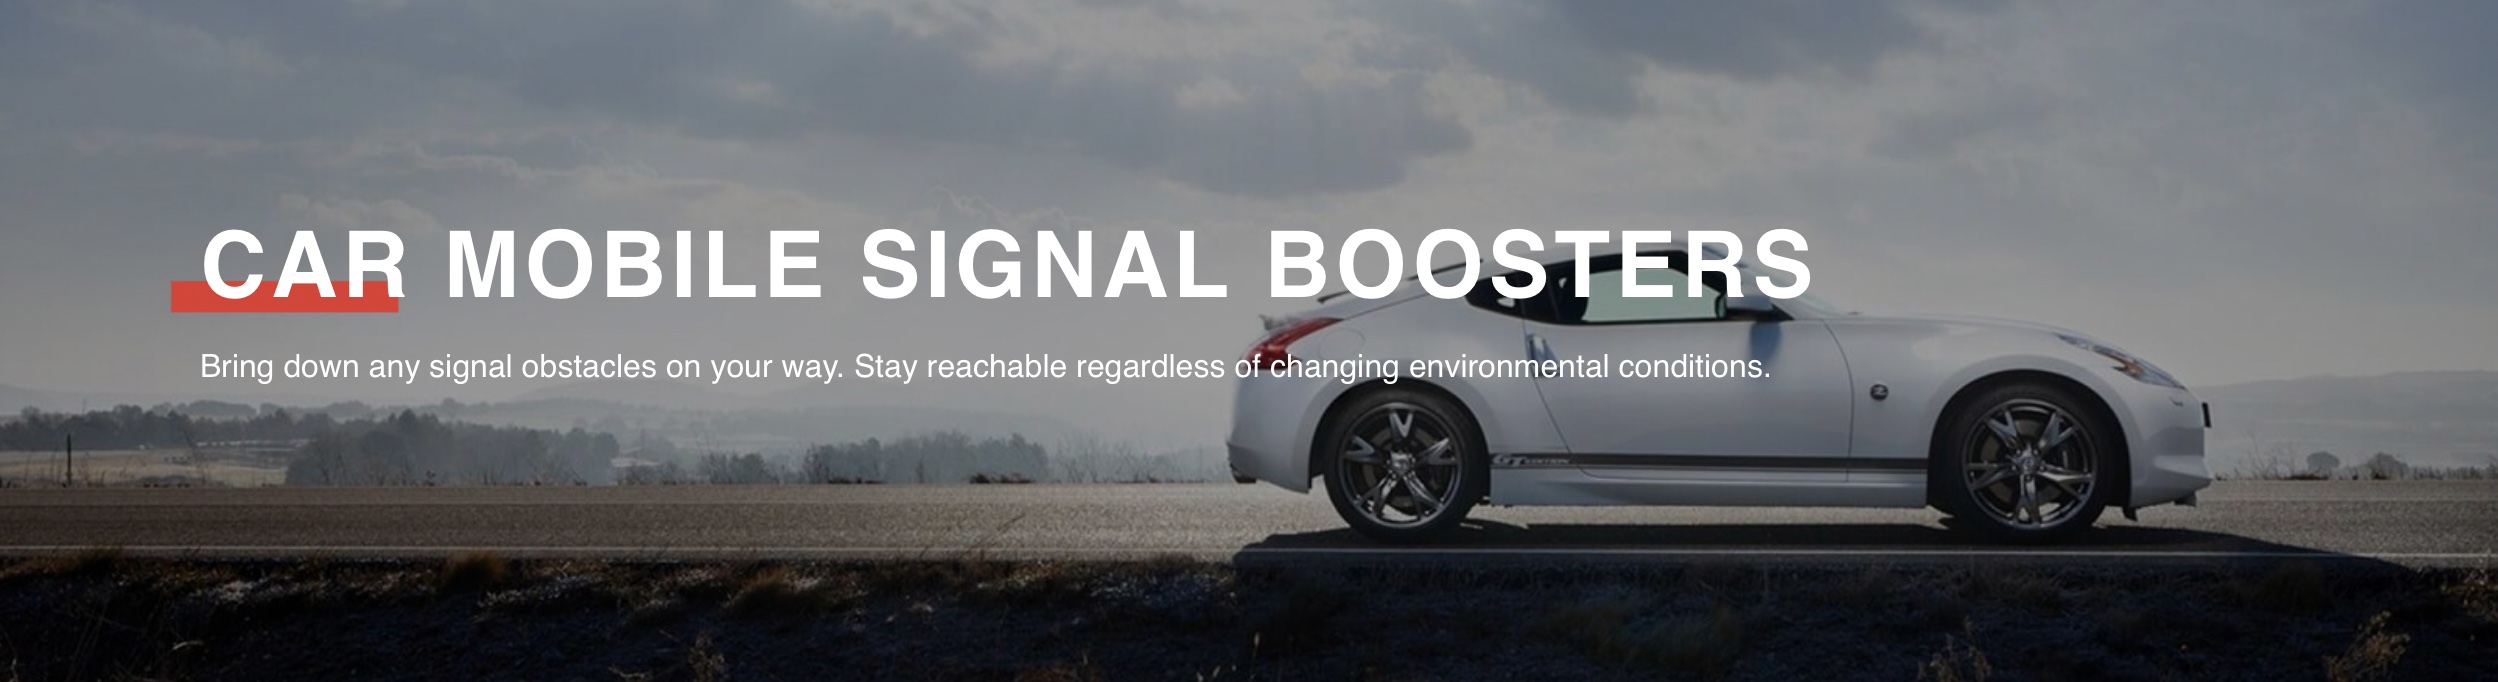 CAR MOBILE SIGNAL BOOSTERS